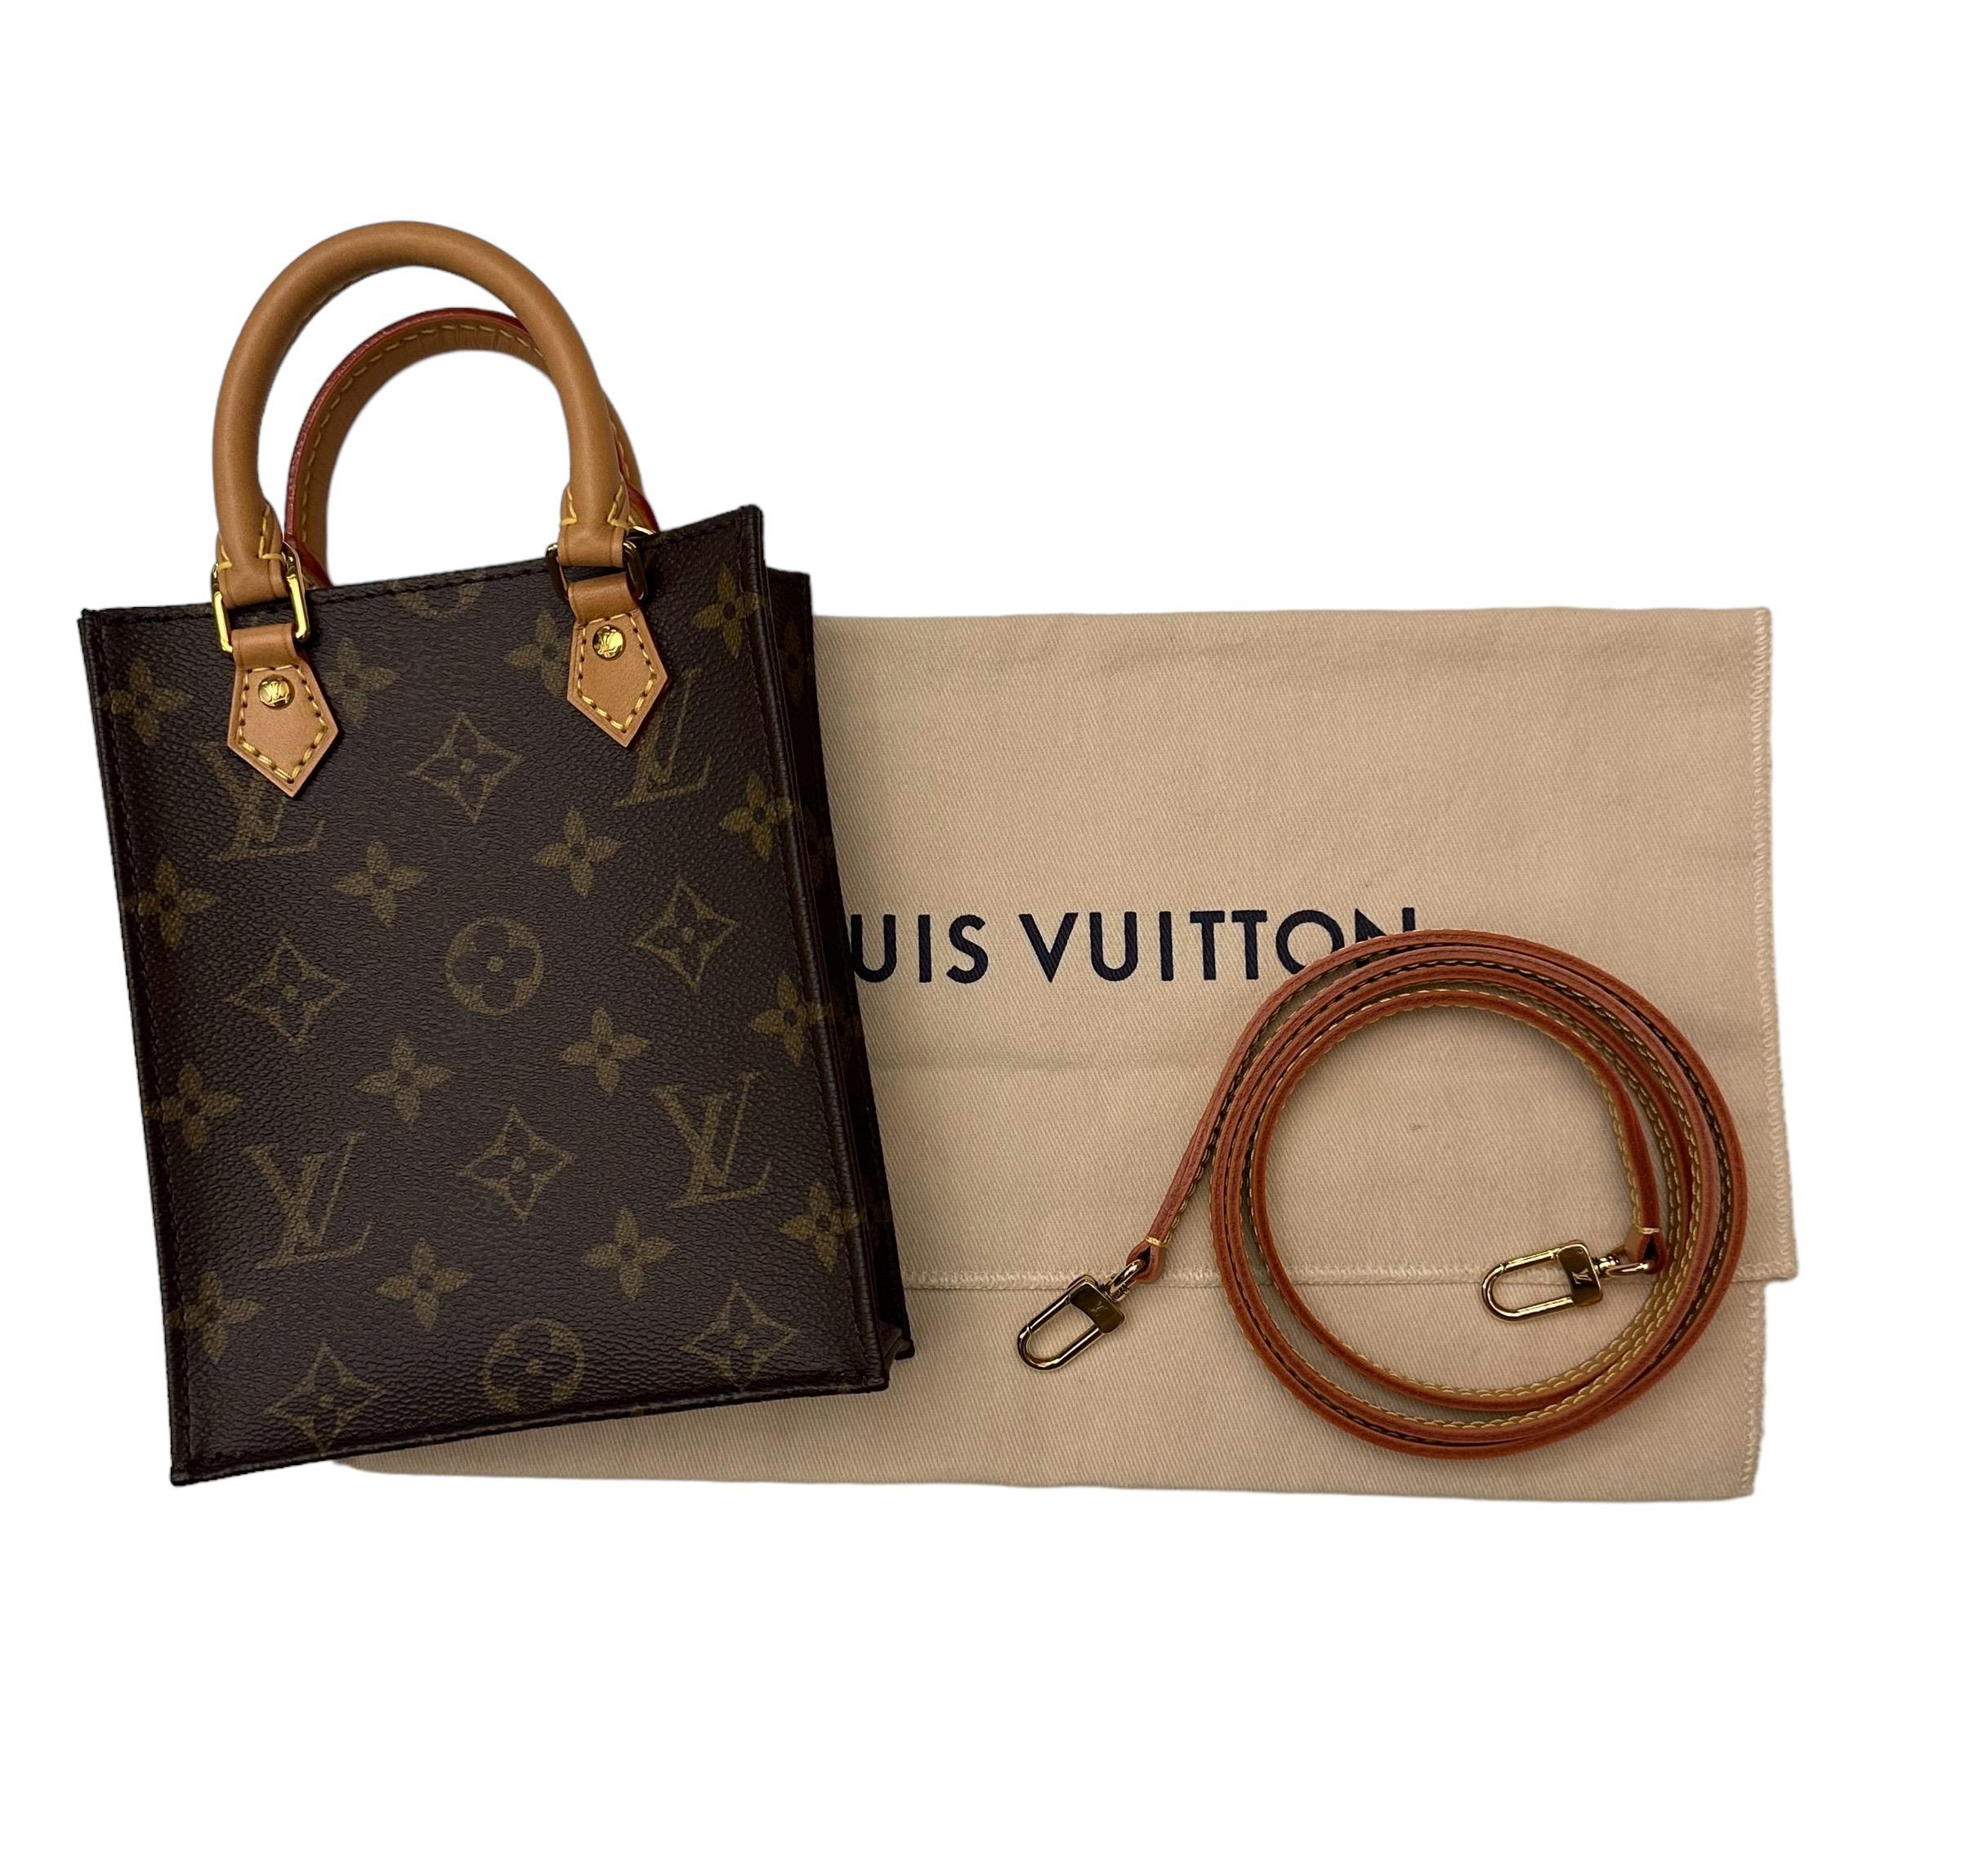 Our pre-owned but new Petit sac plat bag is an exact mini reinterpretation of one of Louis Vuitton's emblematic models: the Sac Plat. 
It is crafted in the iconic Monogram coated canvas with cowhide leather handles and a removable strap.

Year: